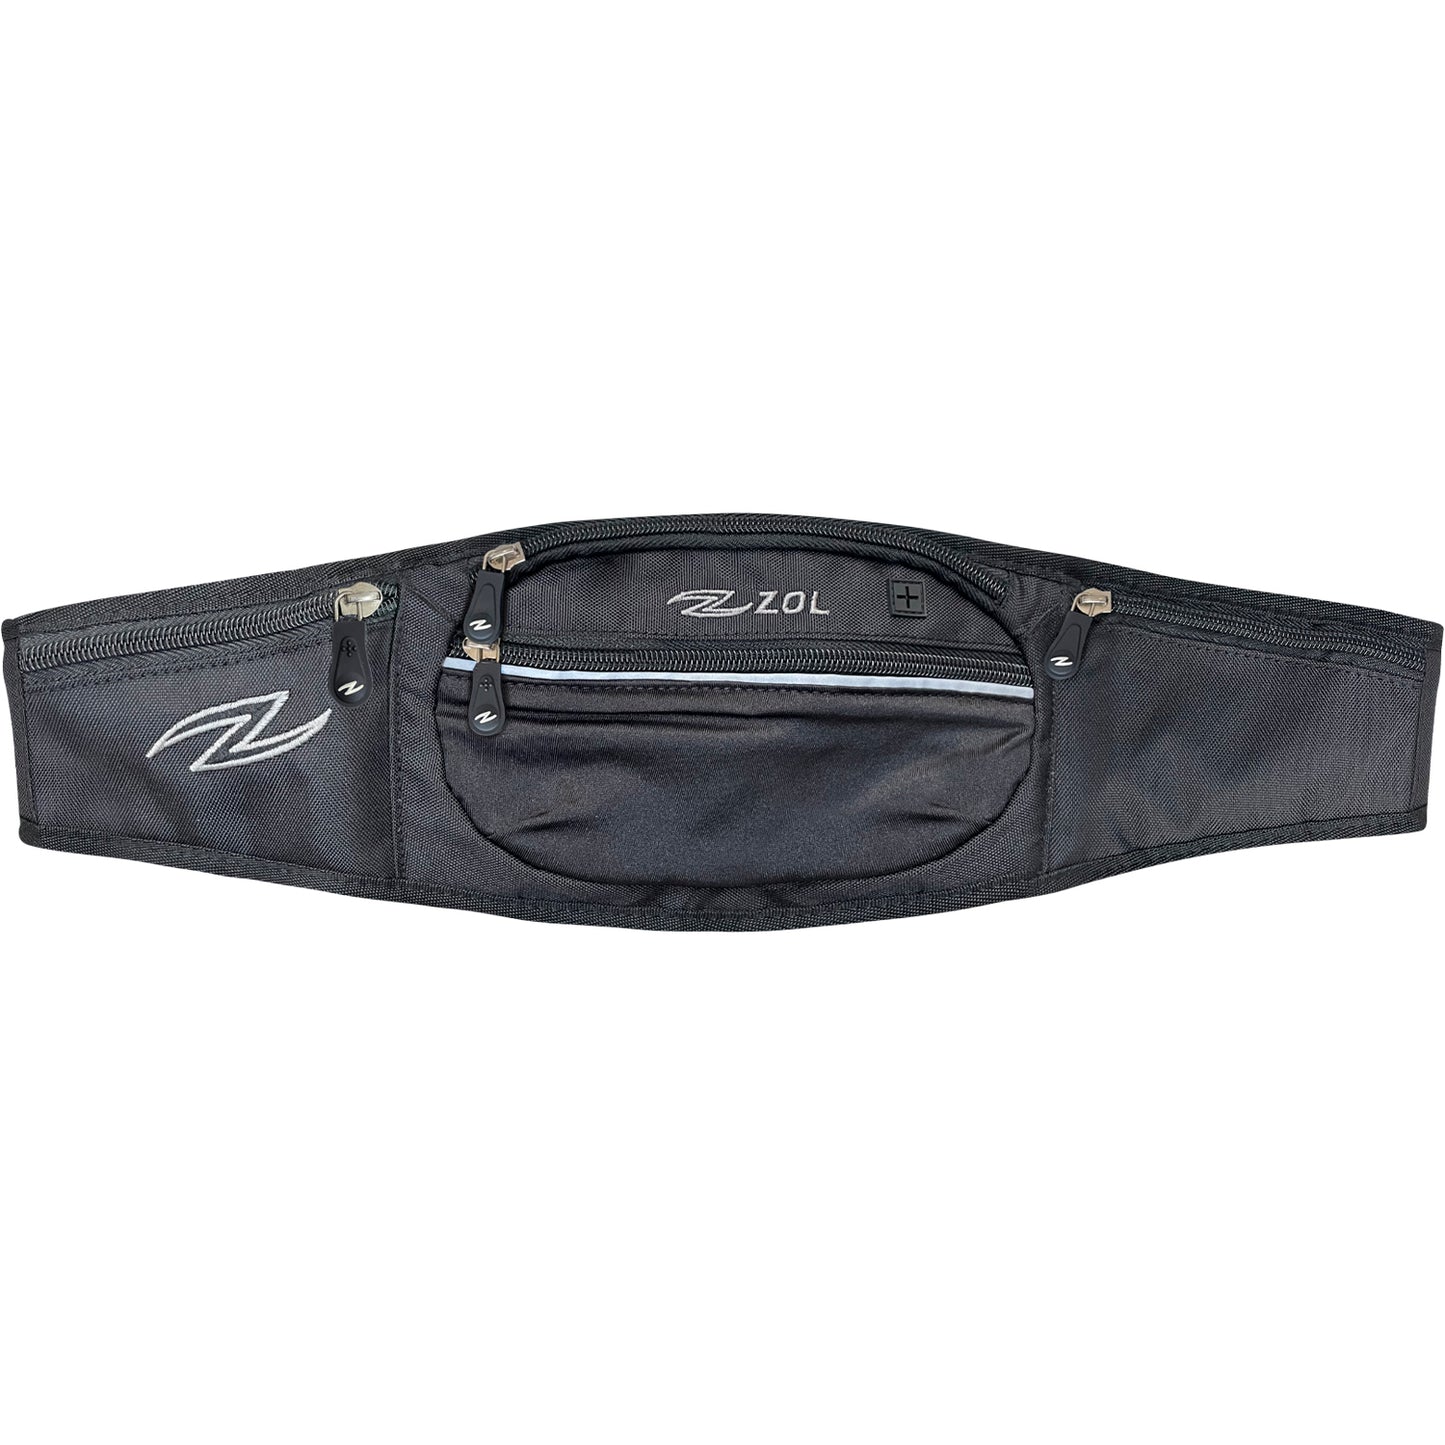 Zol Fitness Fanny Pack - Zol Cycling